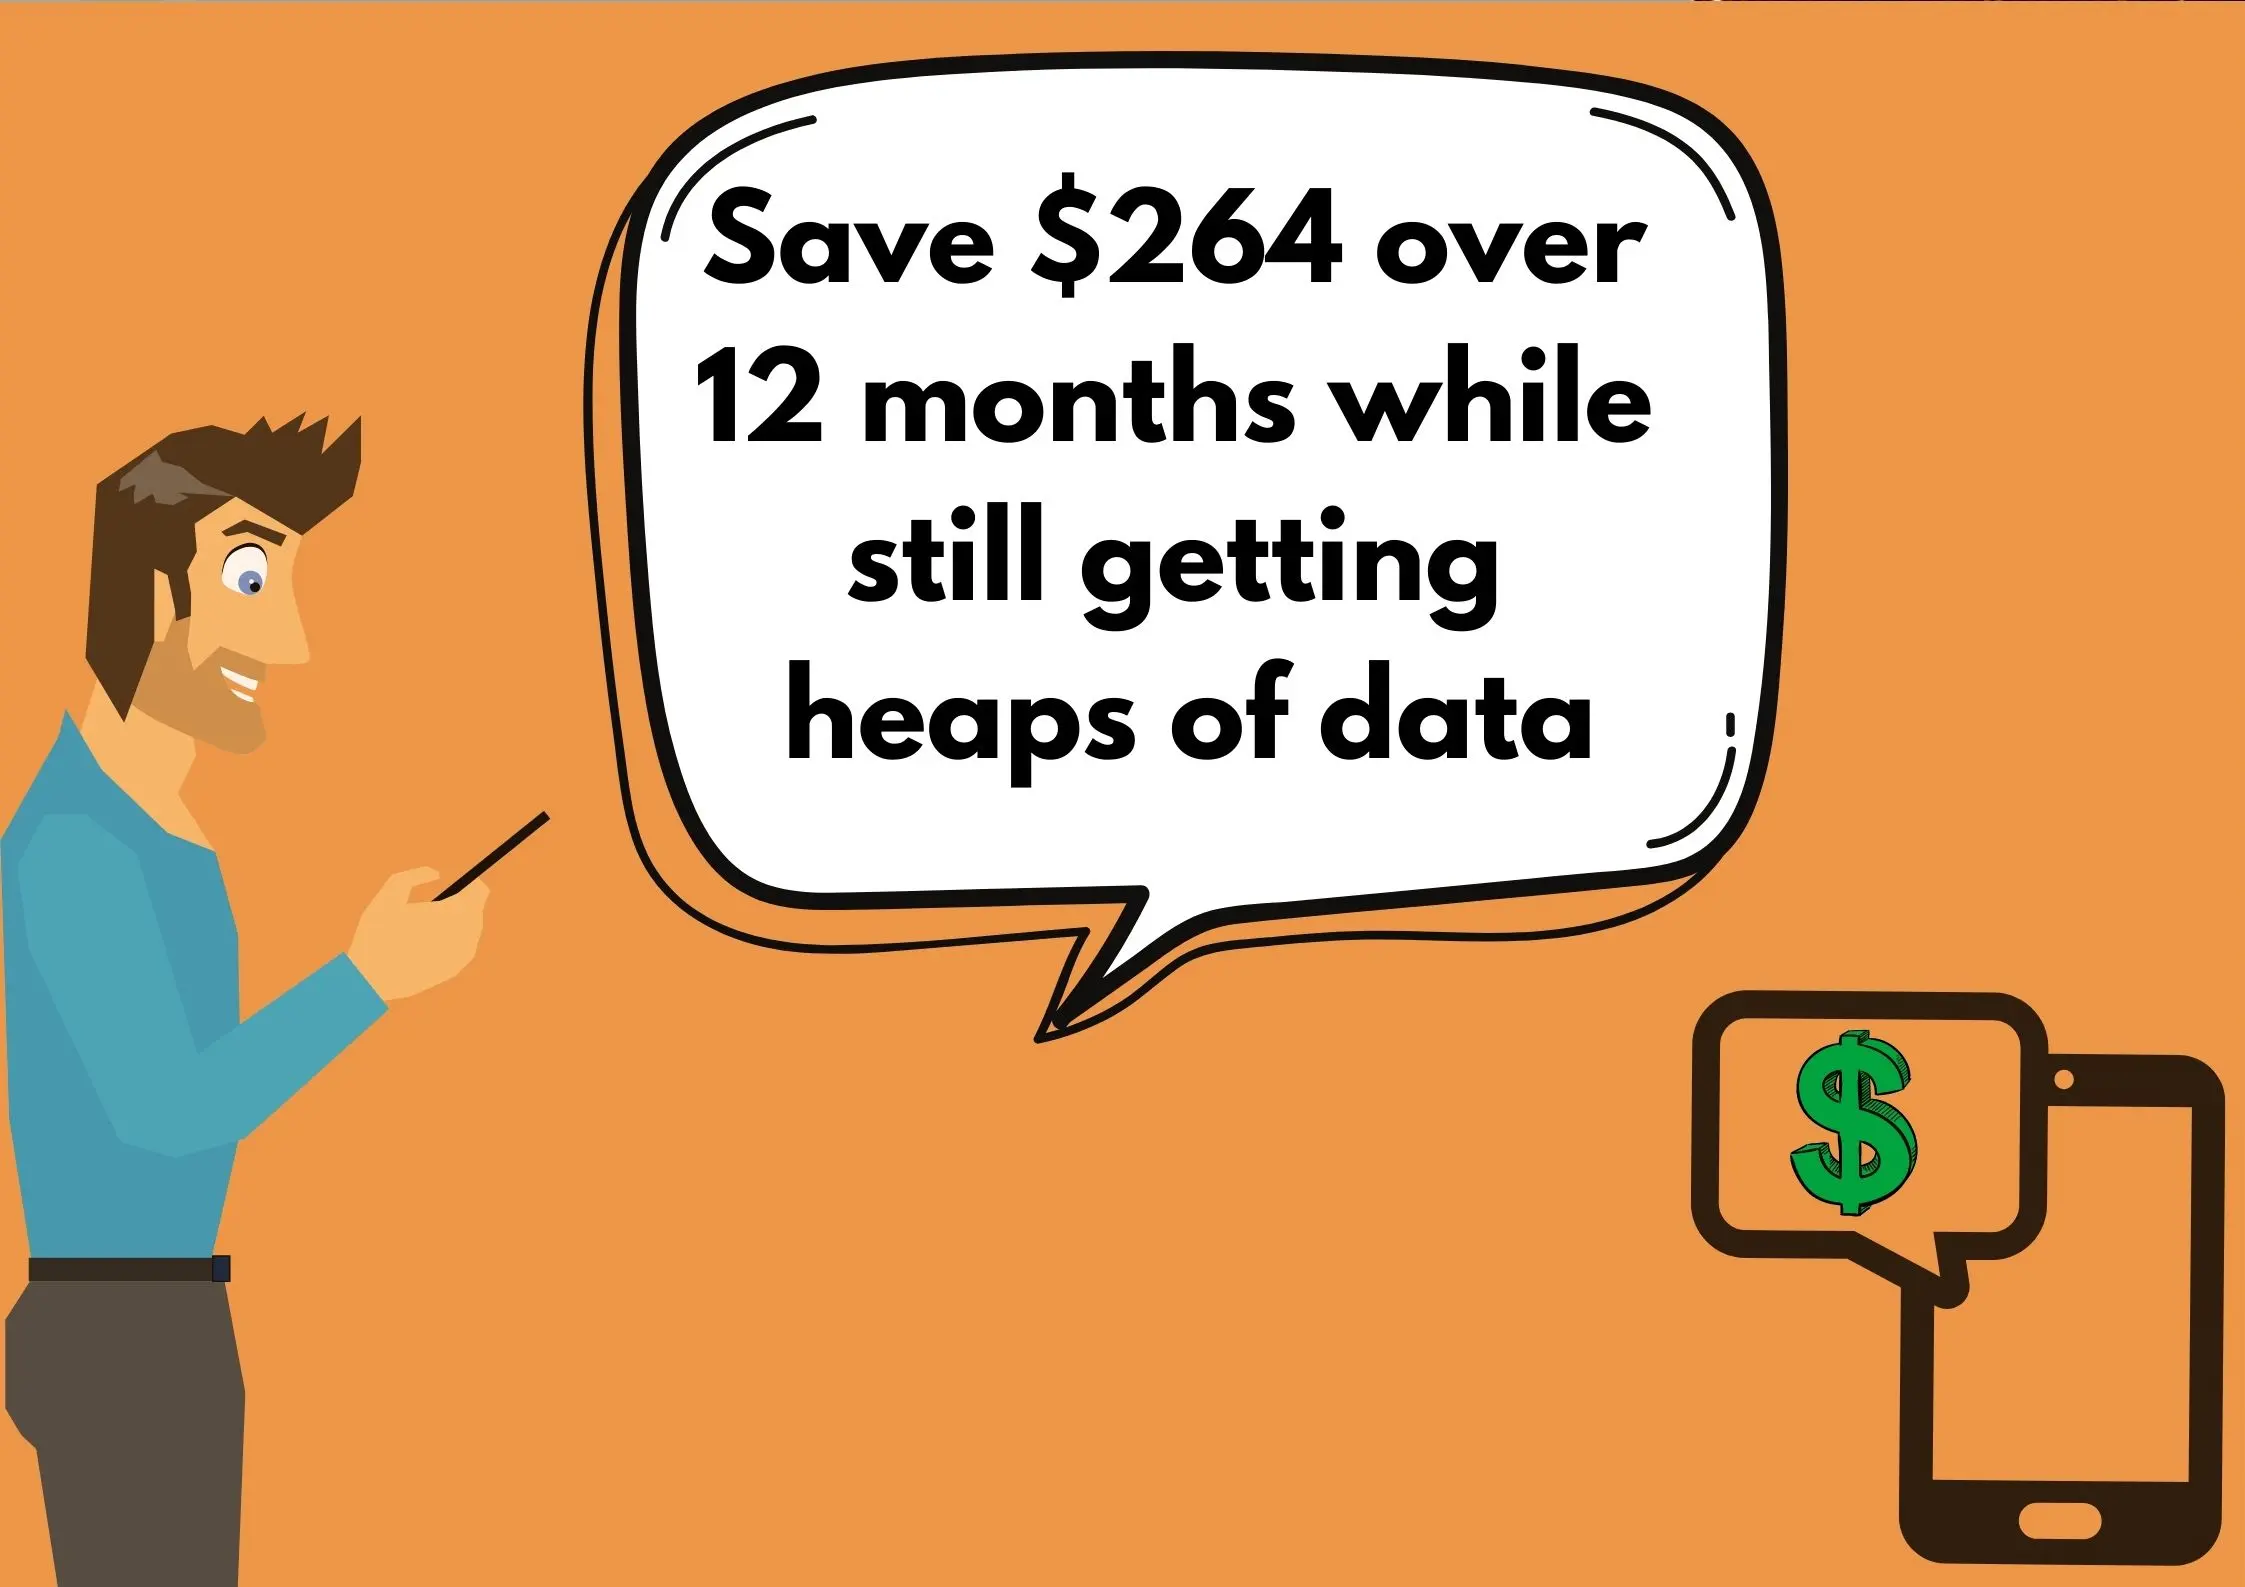 Save $264 while getting heaps of data